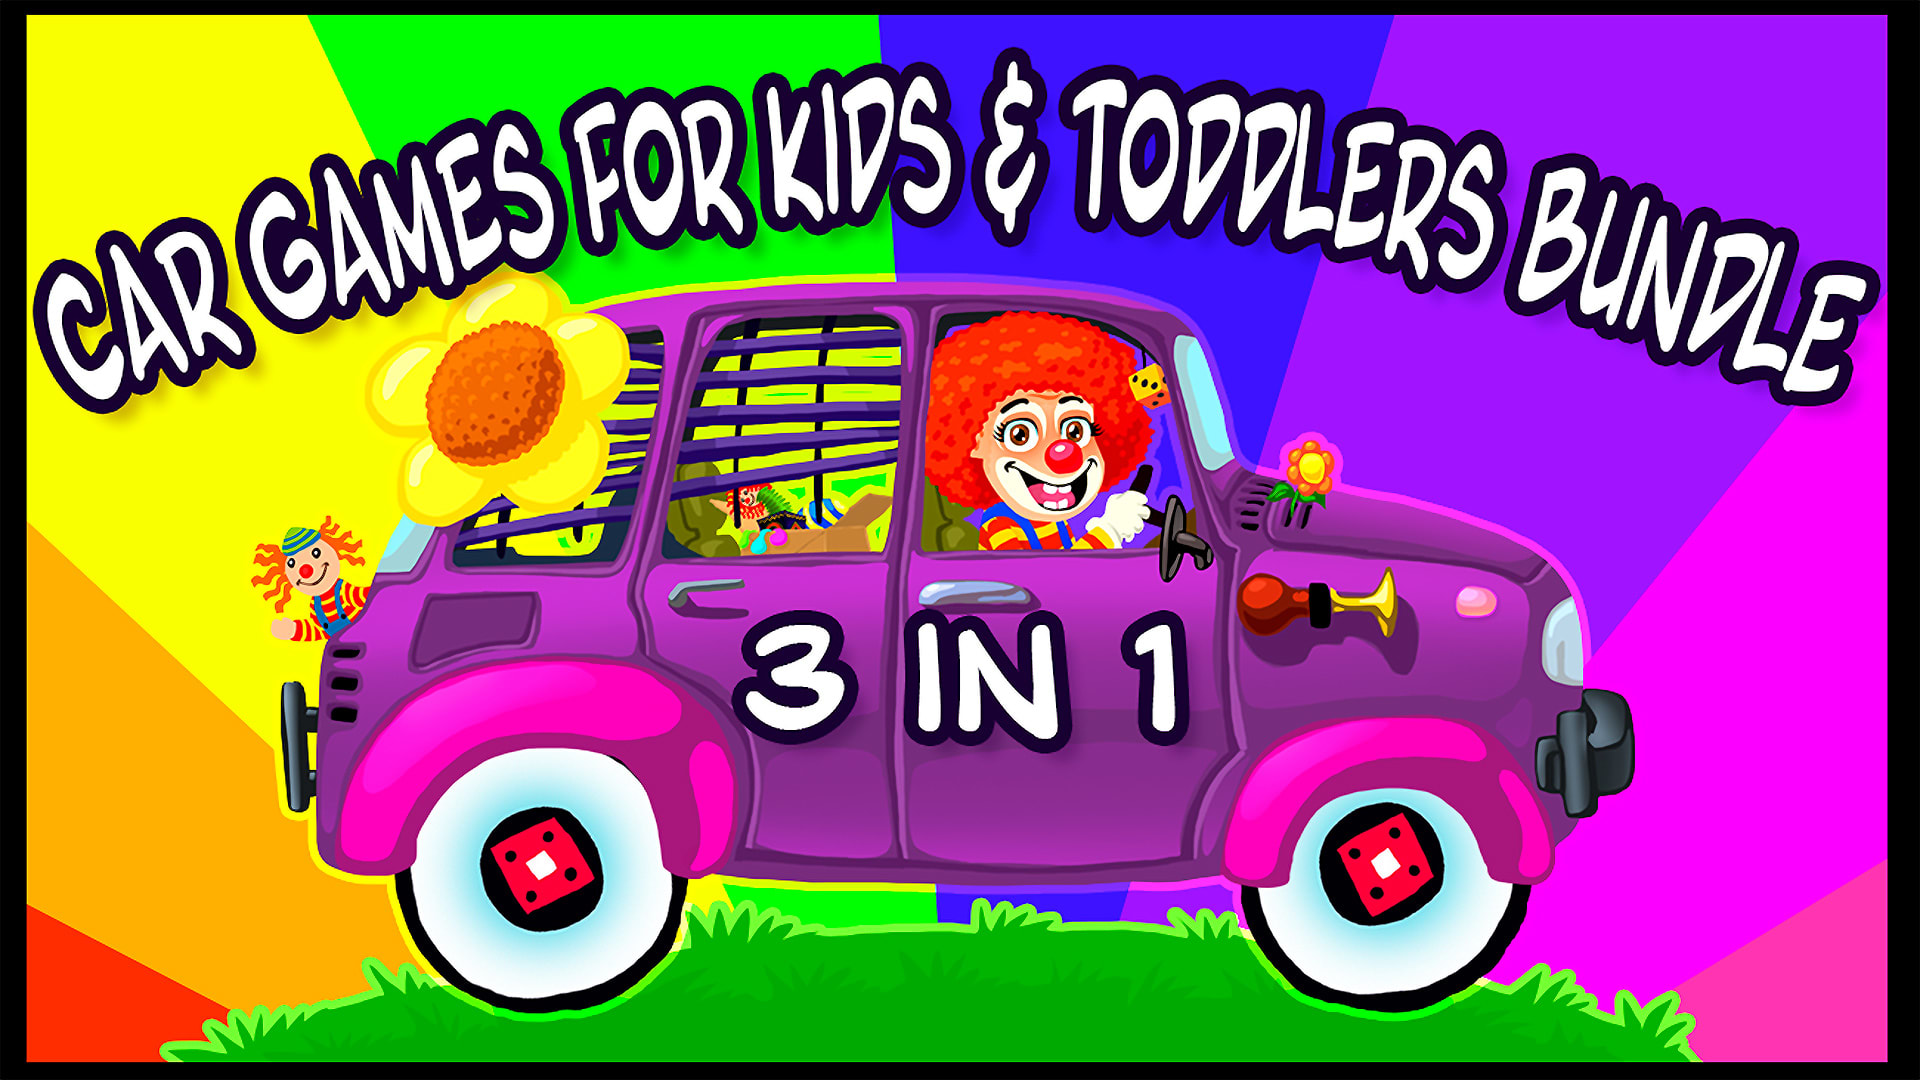 Car Games for Kids & Toddlers Bundle 3 in 1 1